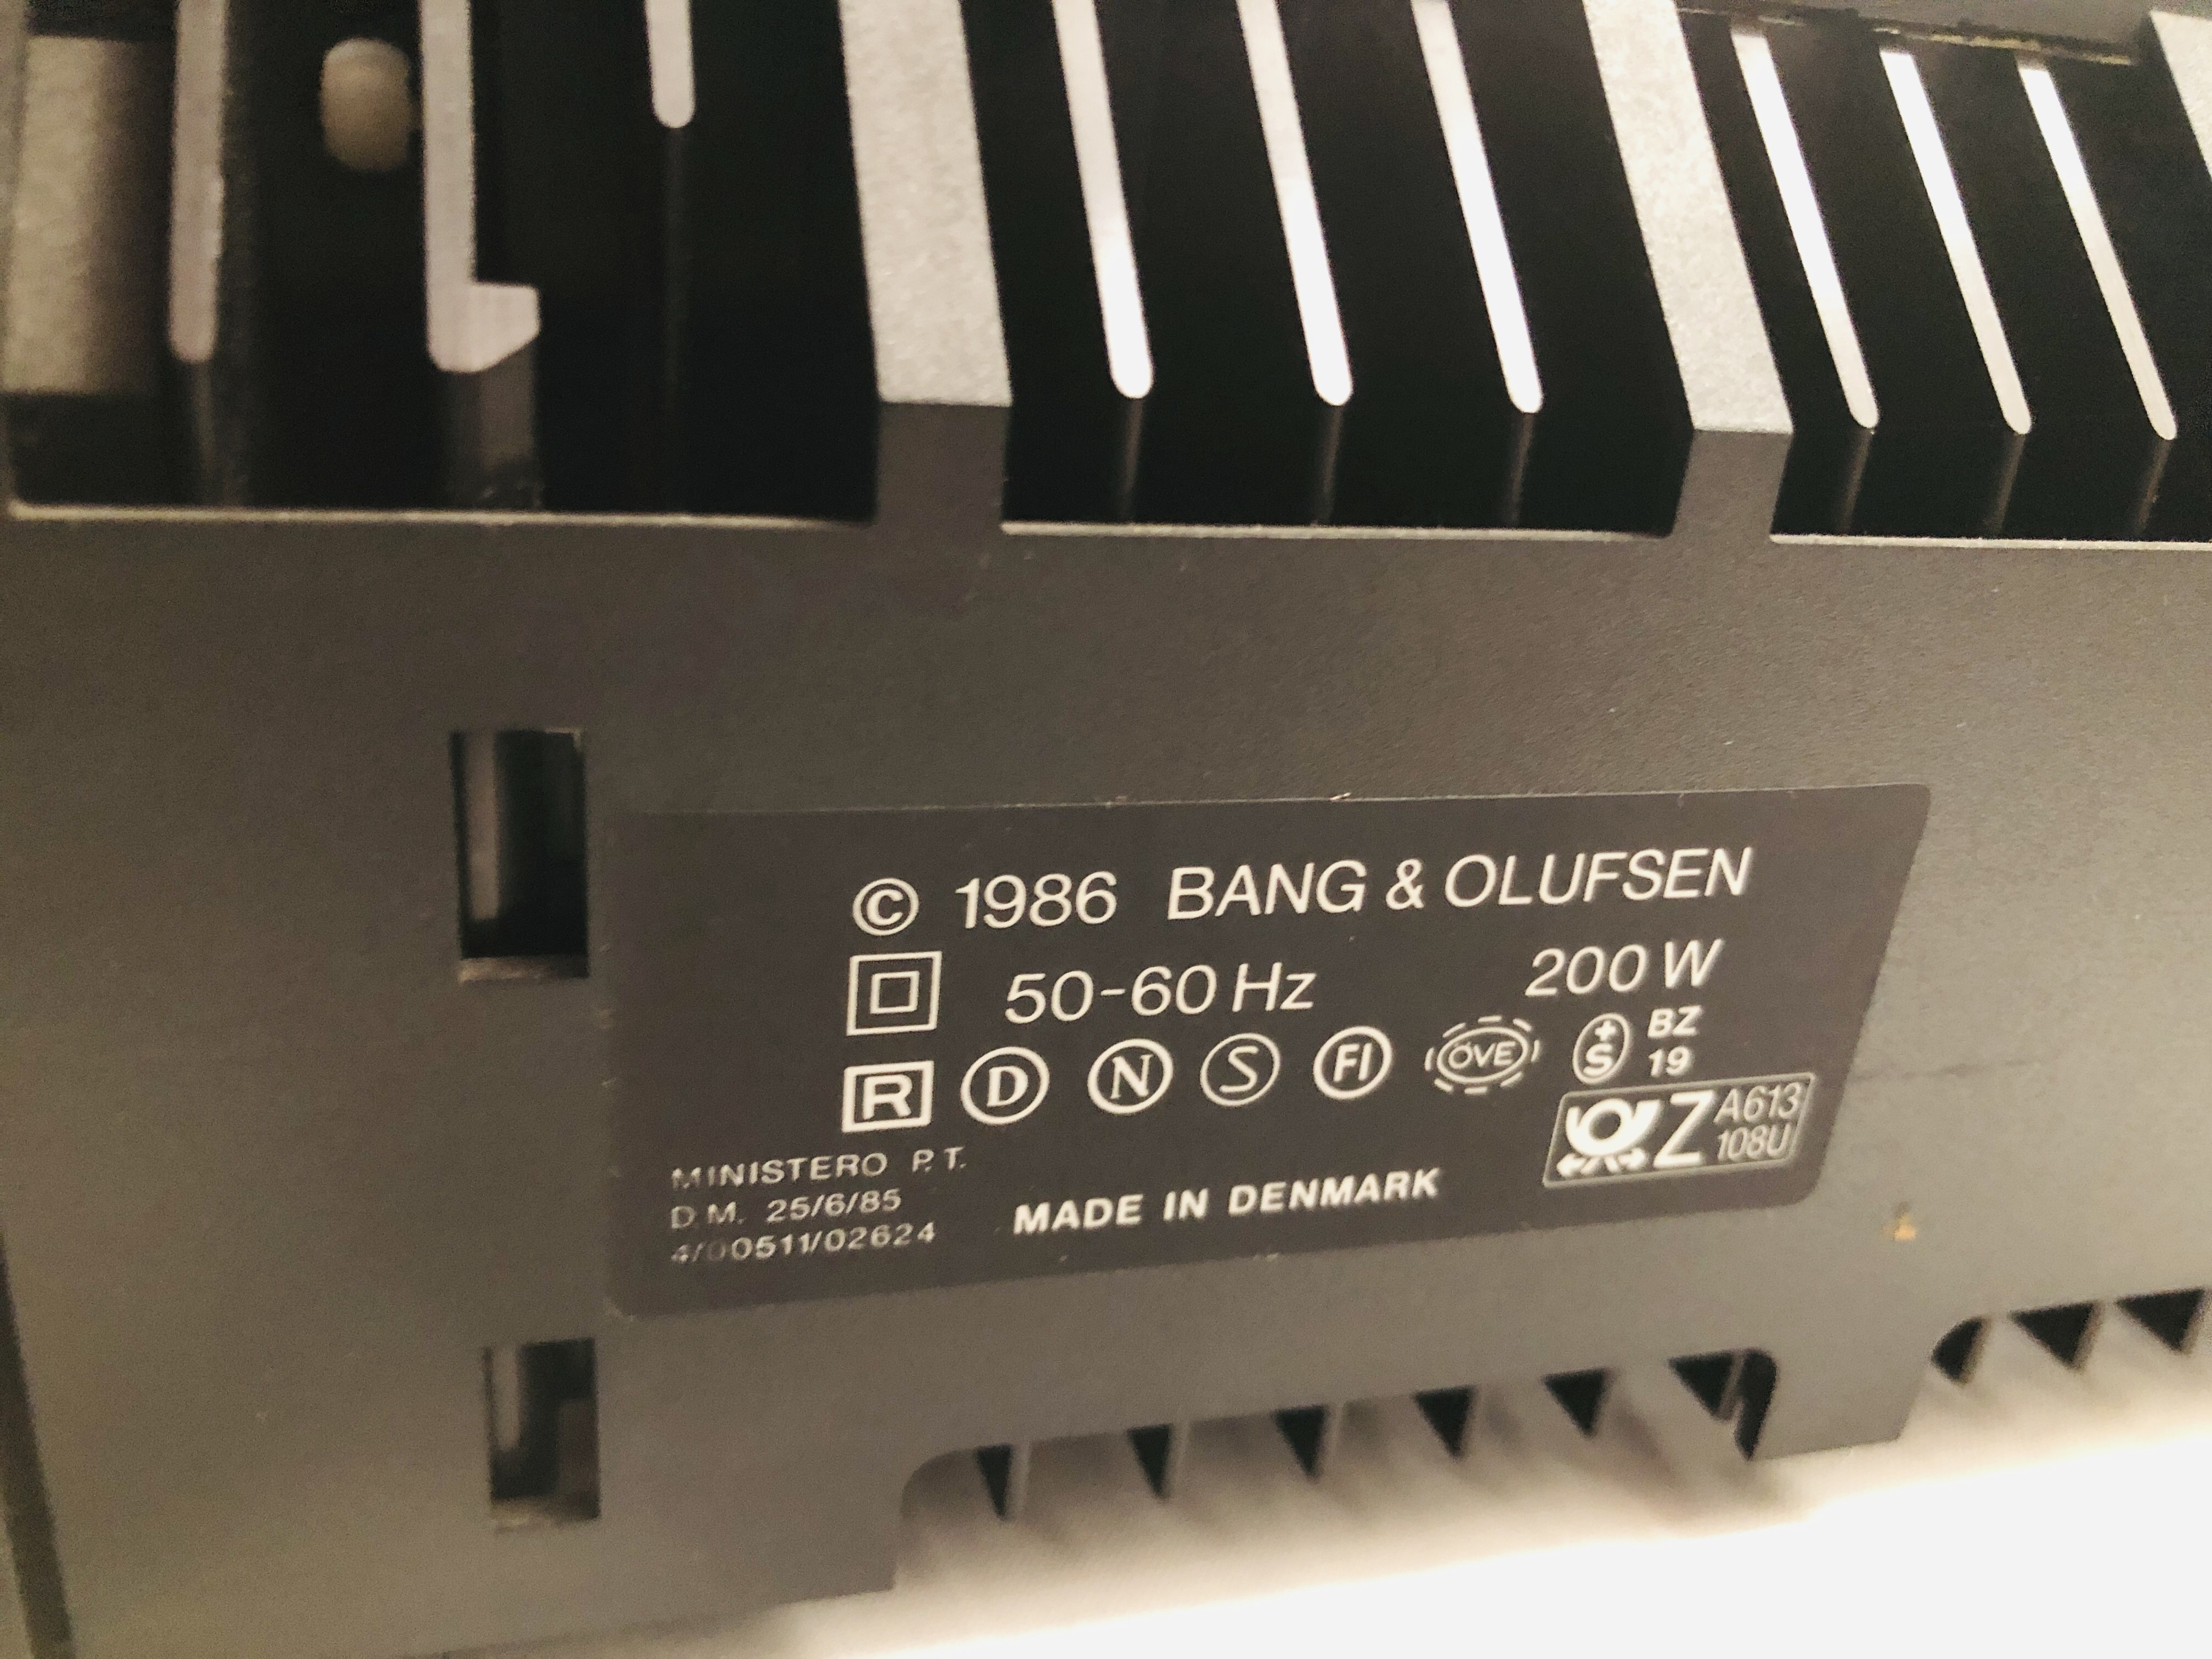 BANG & OLUFSEN BEOCENTER 9000 COMPLETE WITH LOUDSPEAKERS AND WALL BRACKETS (NO REMOTE) - SOLD AS - Image 11 of 11